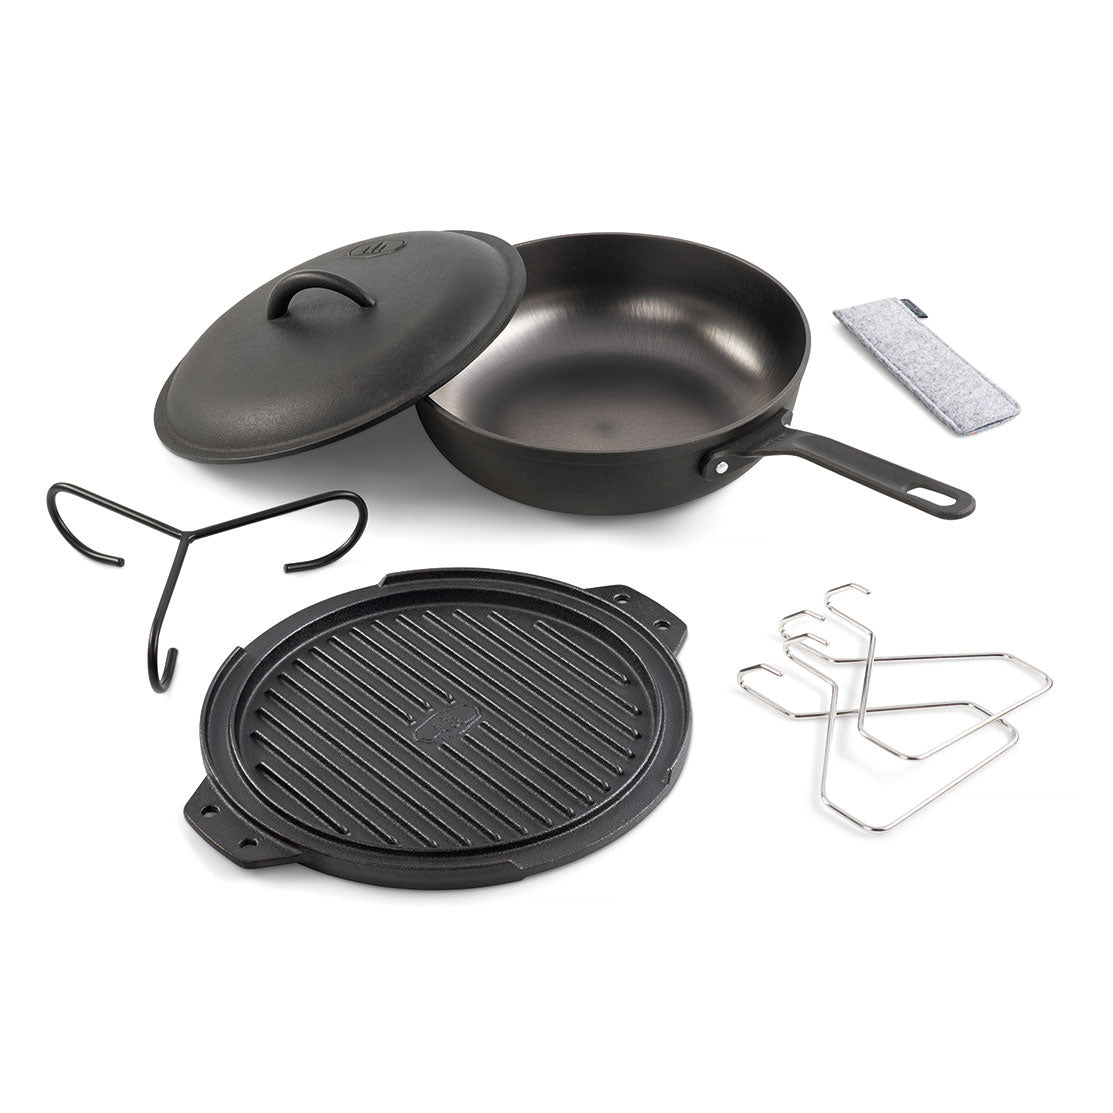 GSI Outdoors Guidecast 8 inch Frying Pan